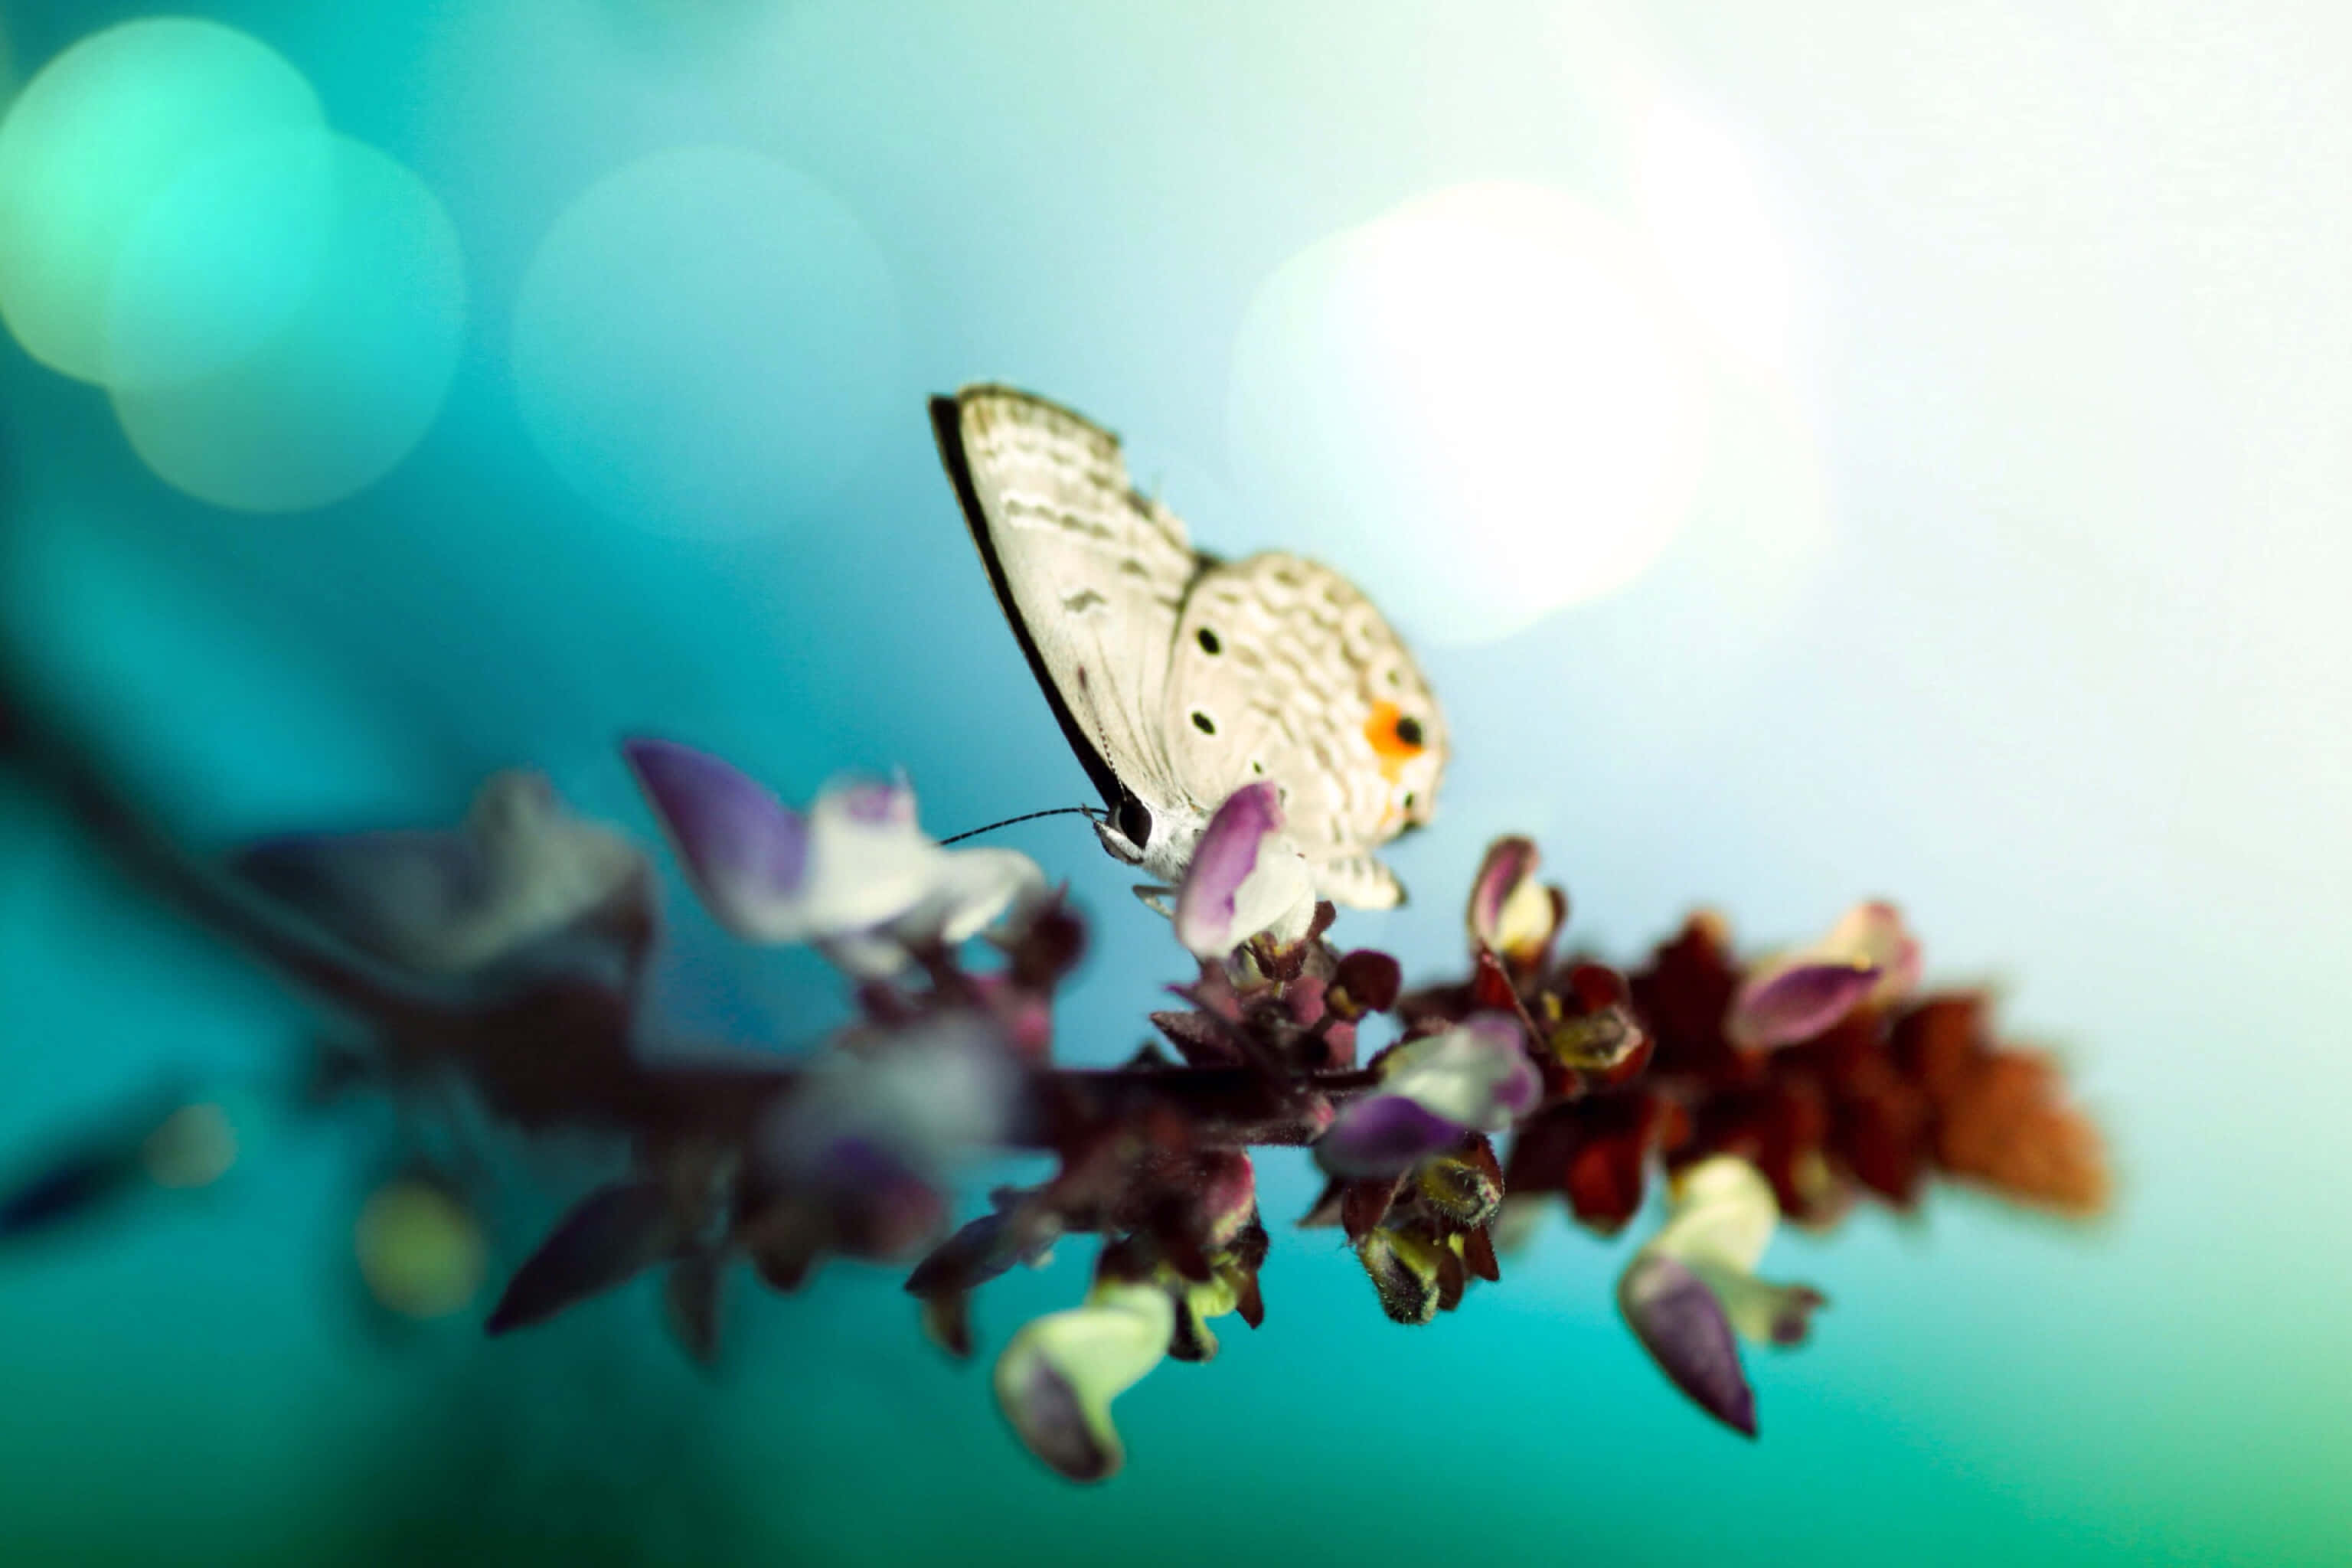 "A vibrant and inviting butterfly garden." Wallpaper